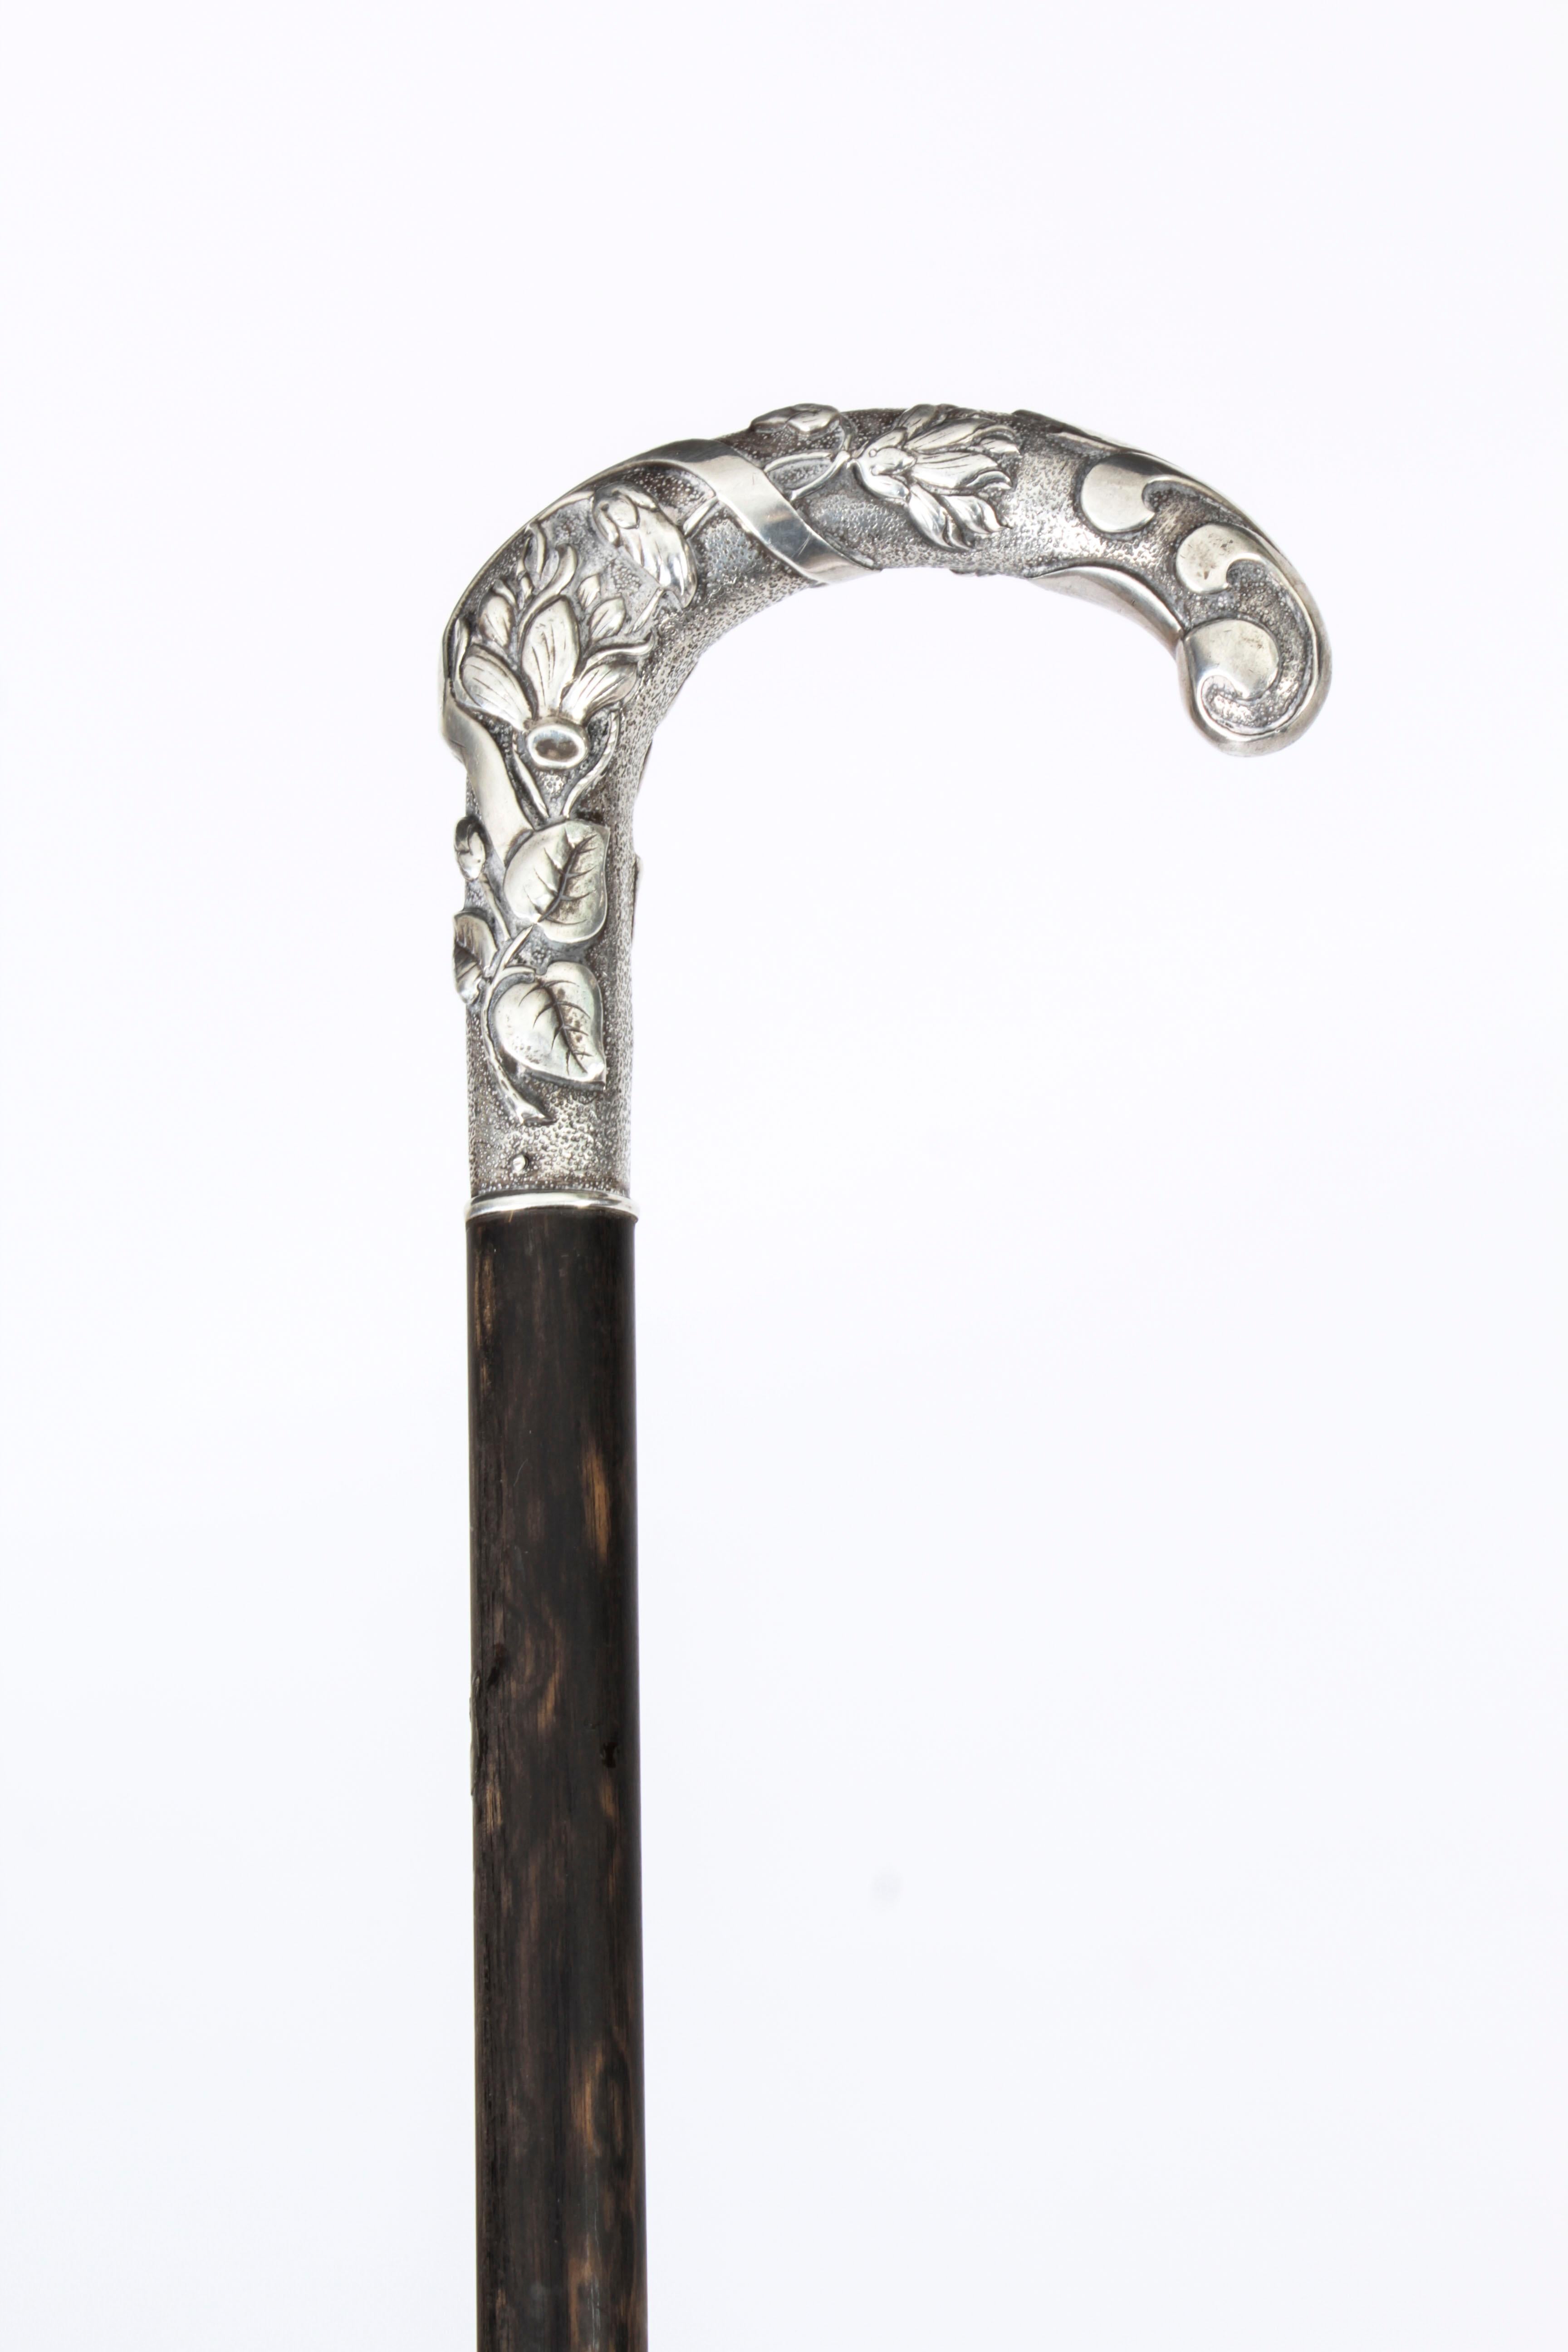 This is a fantastic antique French Art Noveau silver handled and ebonized walking stick, circa 1890 in date.
 
It has a very decorative silver hook handle decorated with foliate ornamentation which is cast with great attention to detail with a